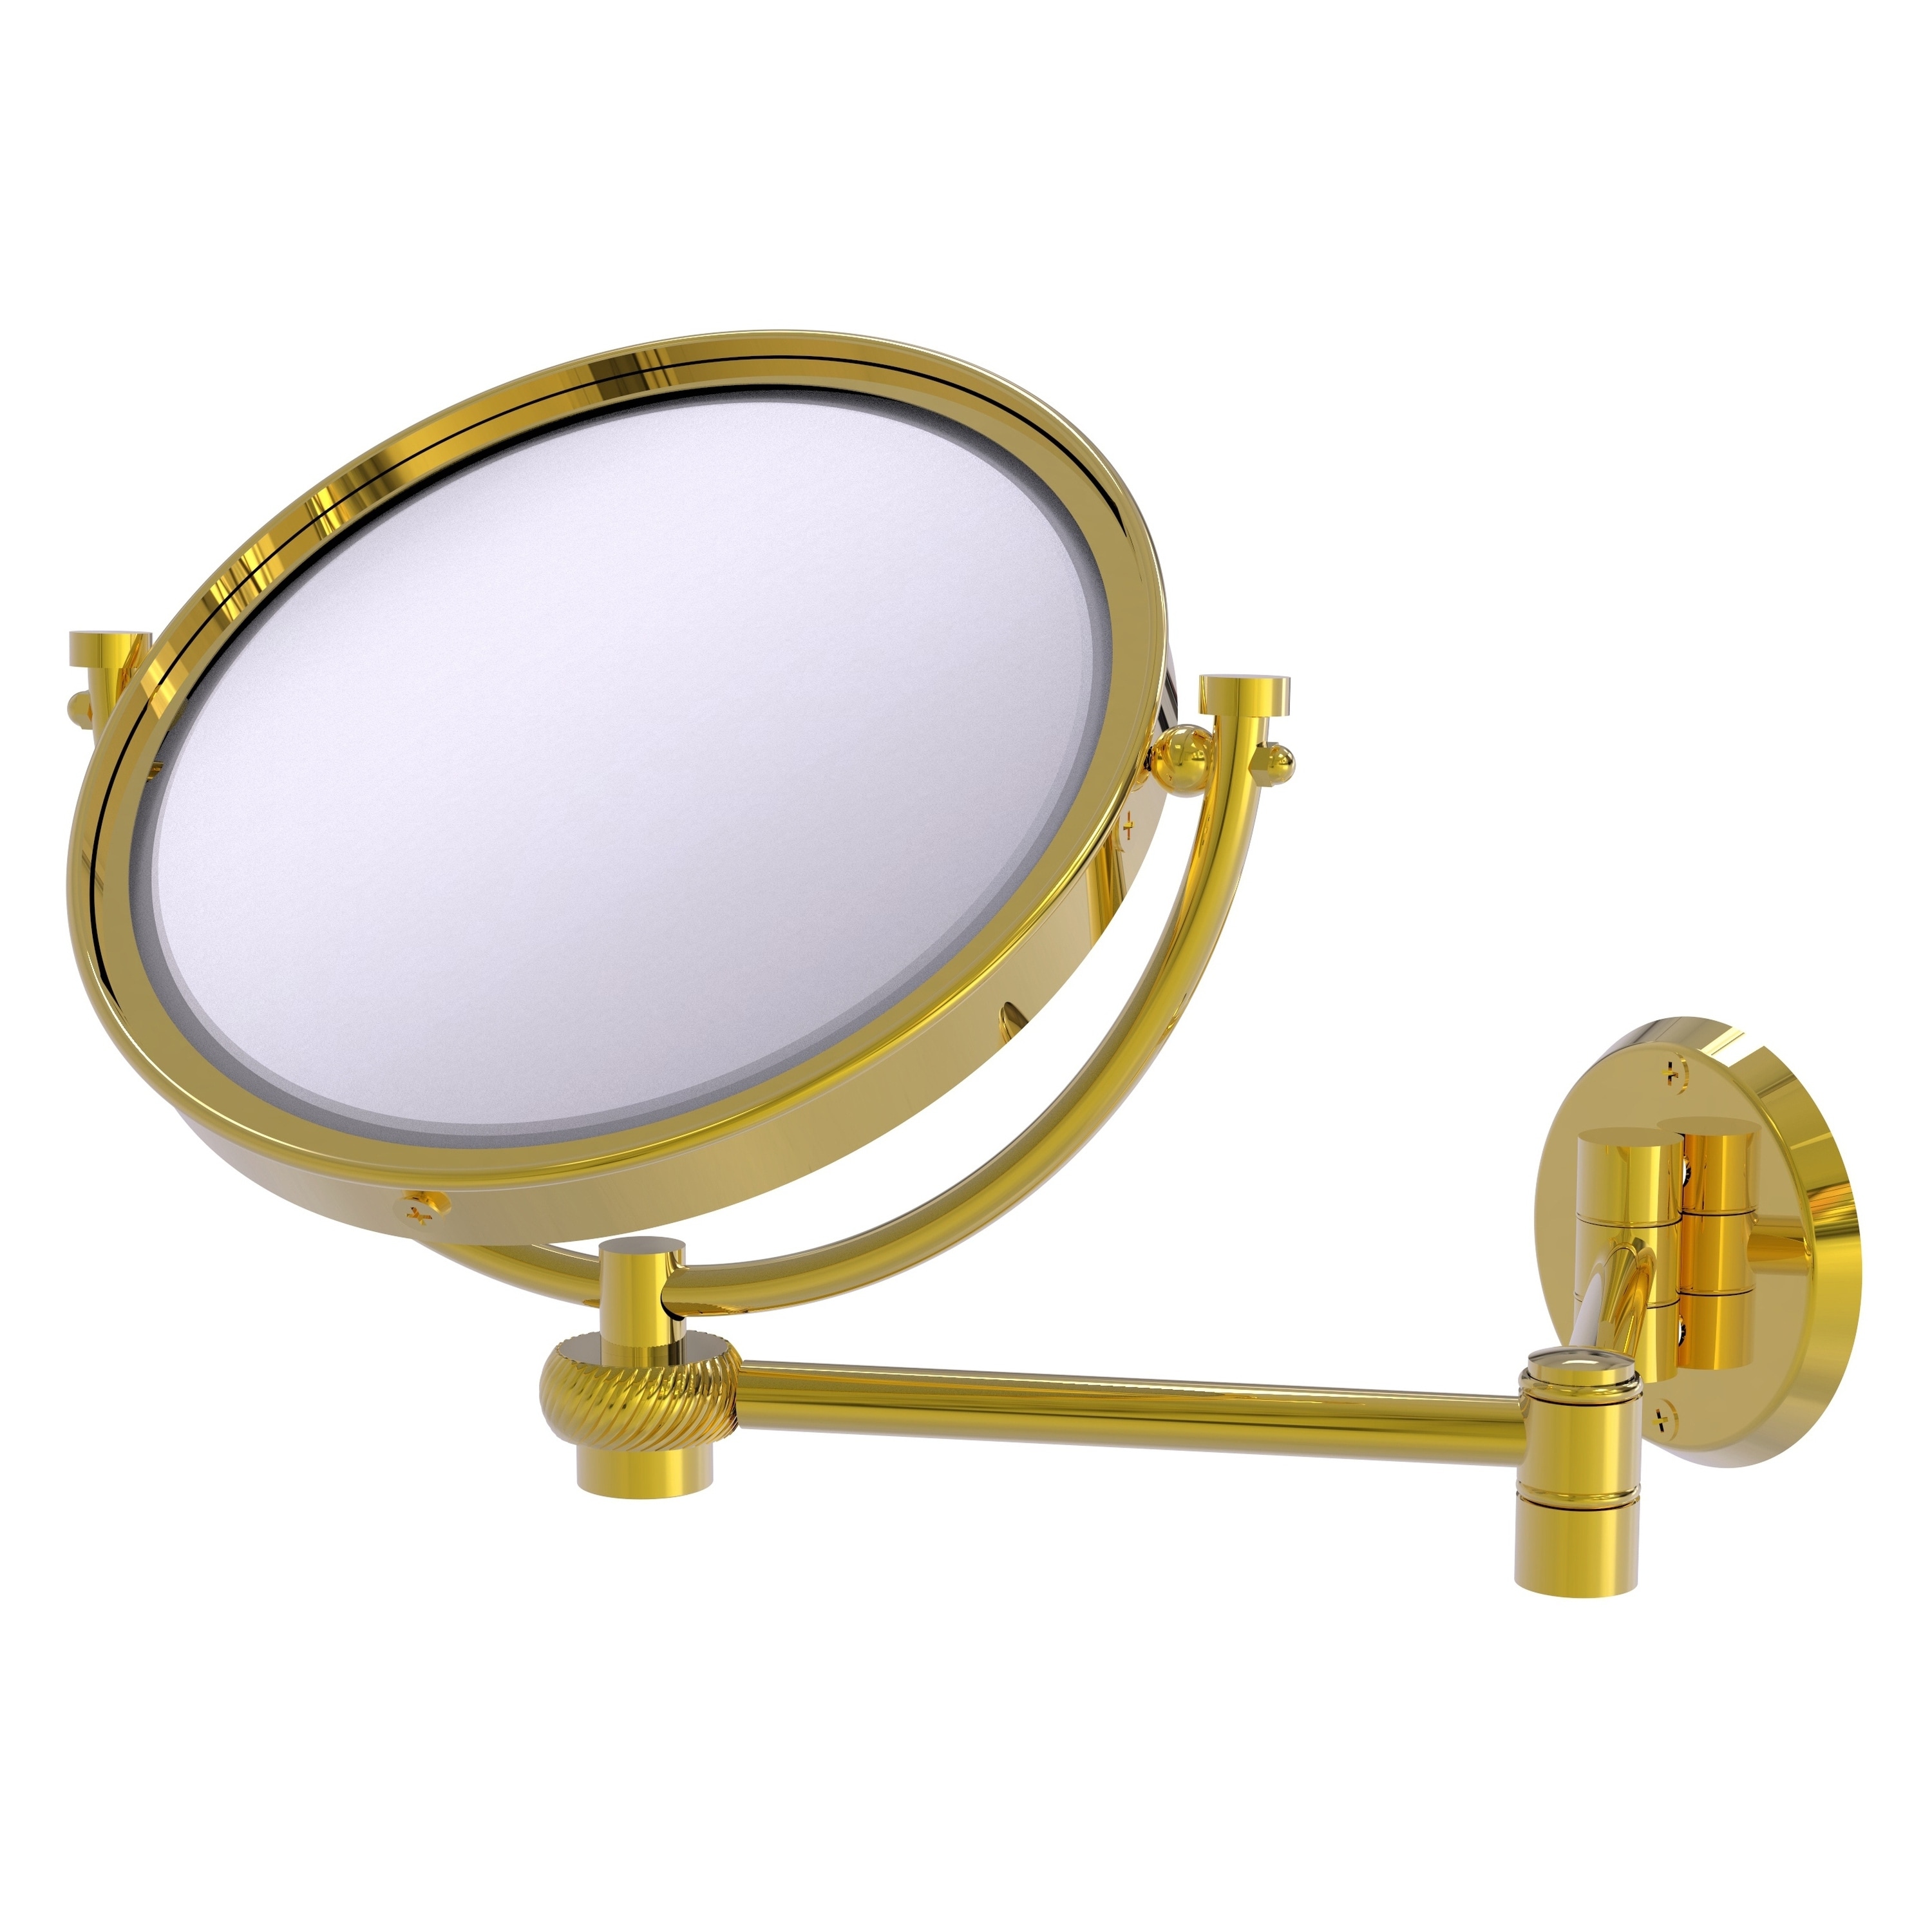 8-in x 10-in Polished Silver Double-sided 5X Magnifying Wall-mounted Vanity Mirror | - Allied Brass WM-6T/4X-PB